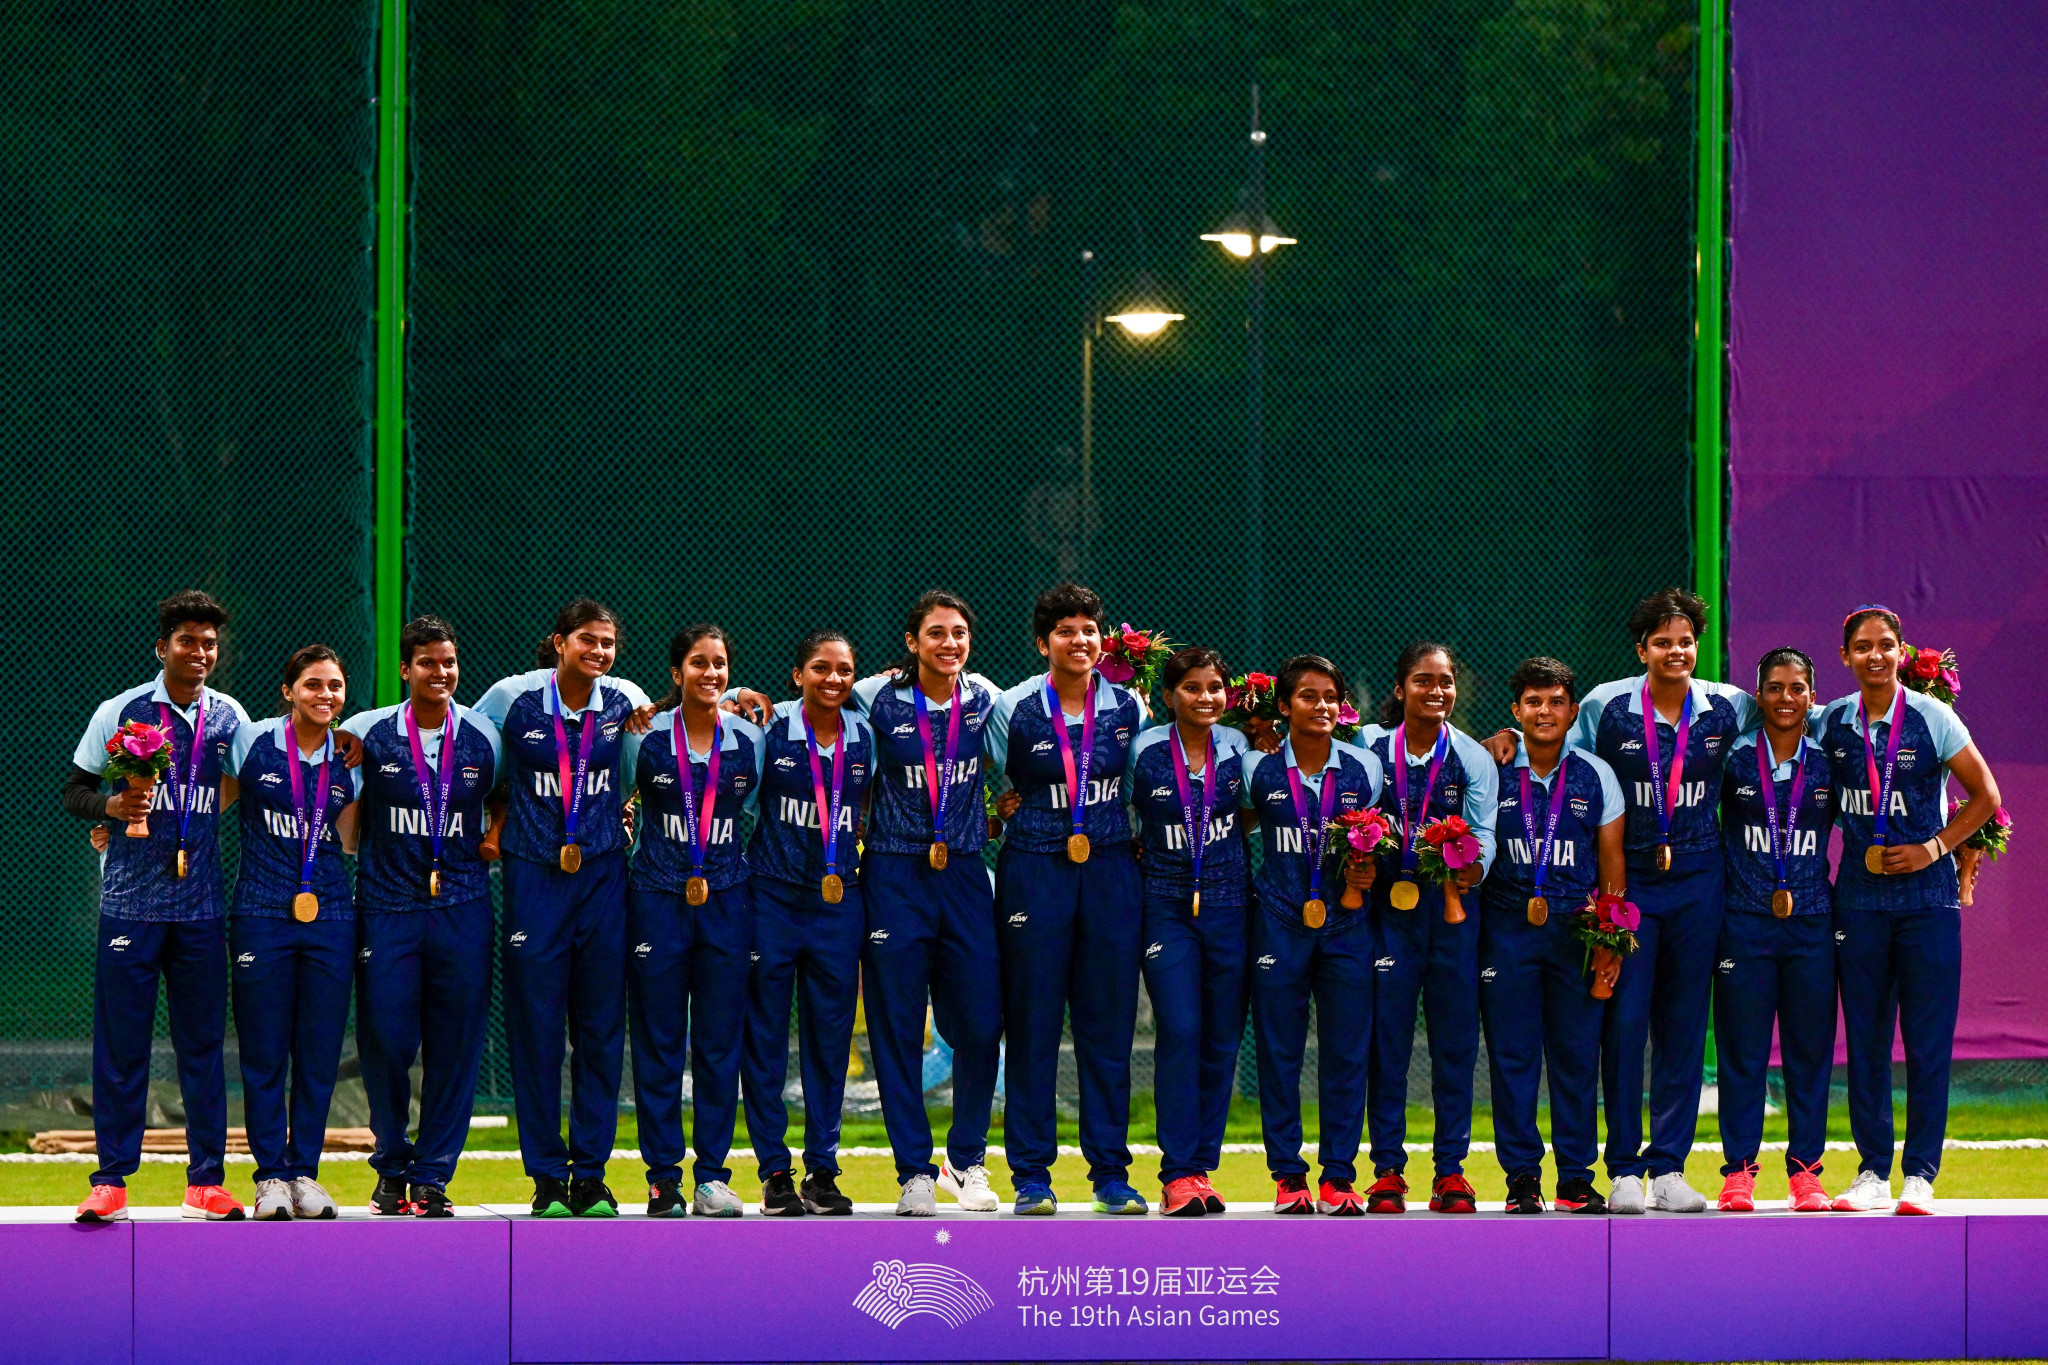 India's women's team ended the country's long wait for an Asian Games cricket gold by triumphing on their debut in the event ©Getty Images